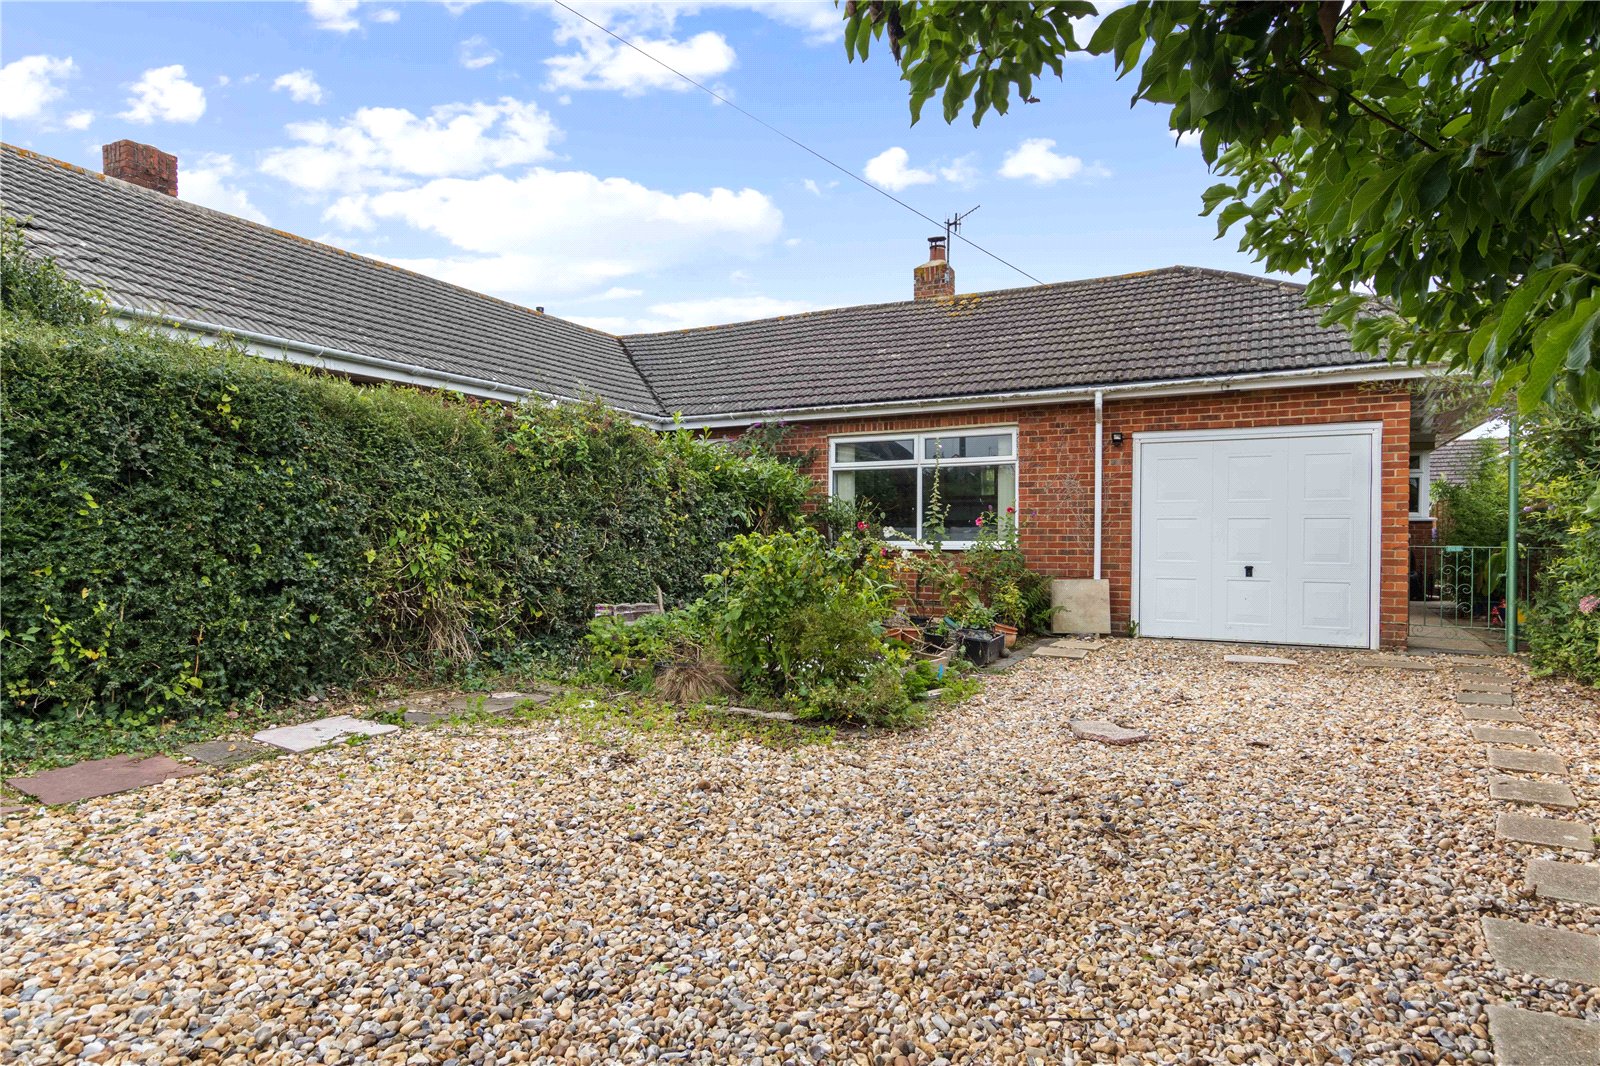 3 bed bungalow for sale in New Barn Lane, North Bersted  - Property Image 1